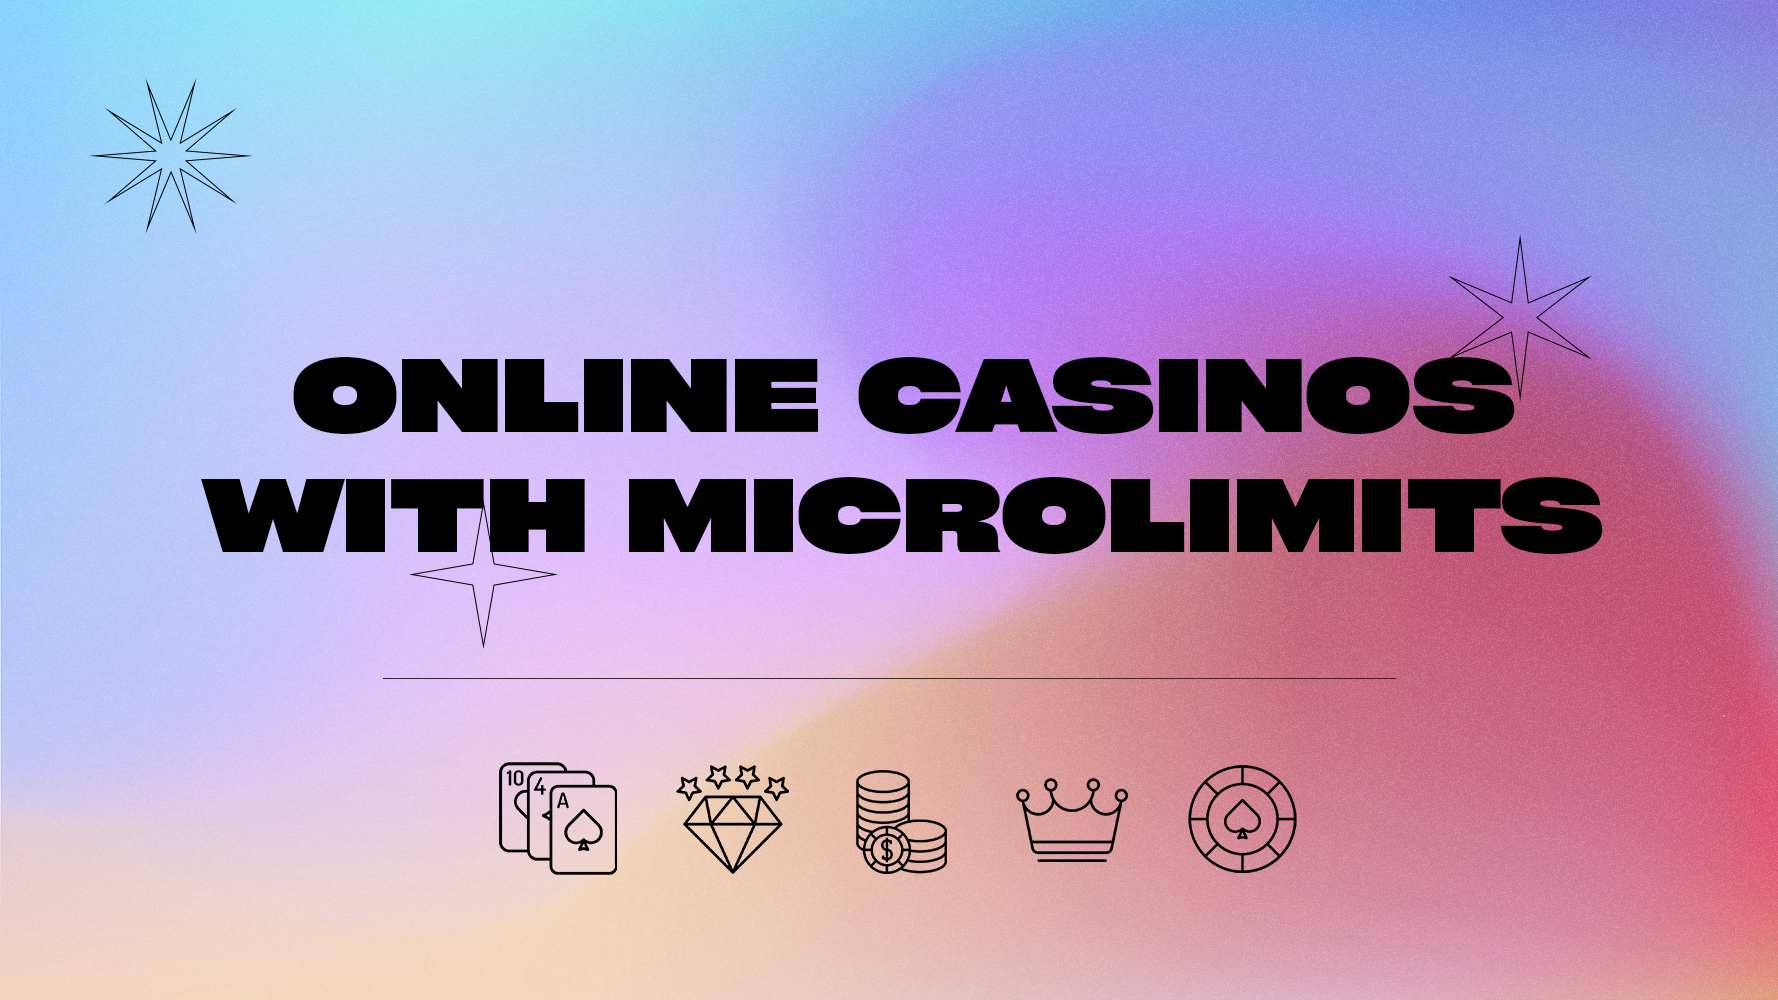 Online Casinos with Microlimits